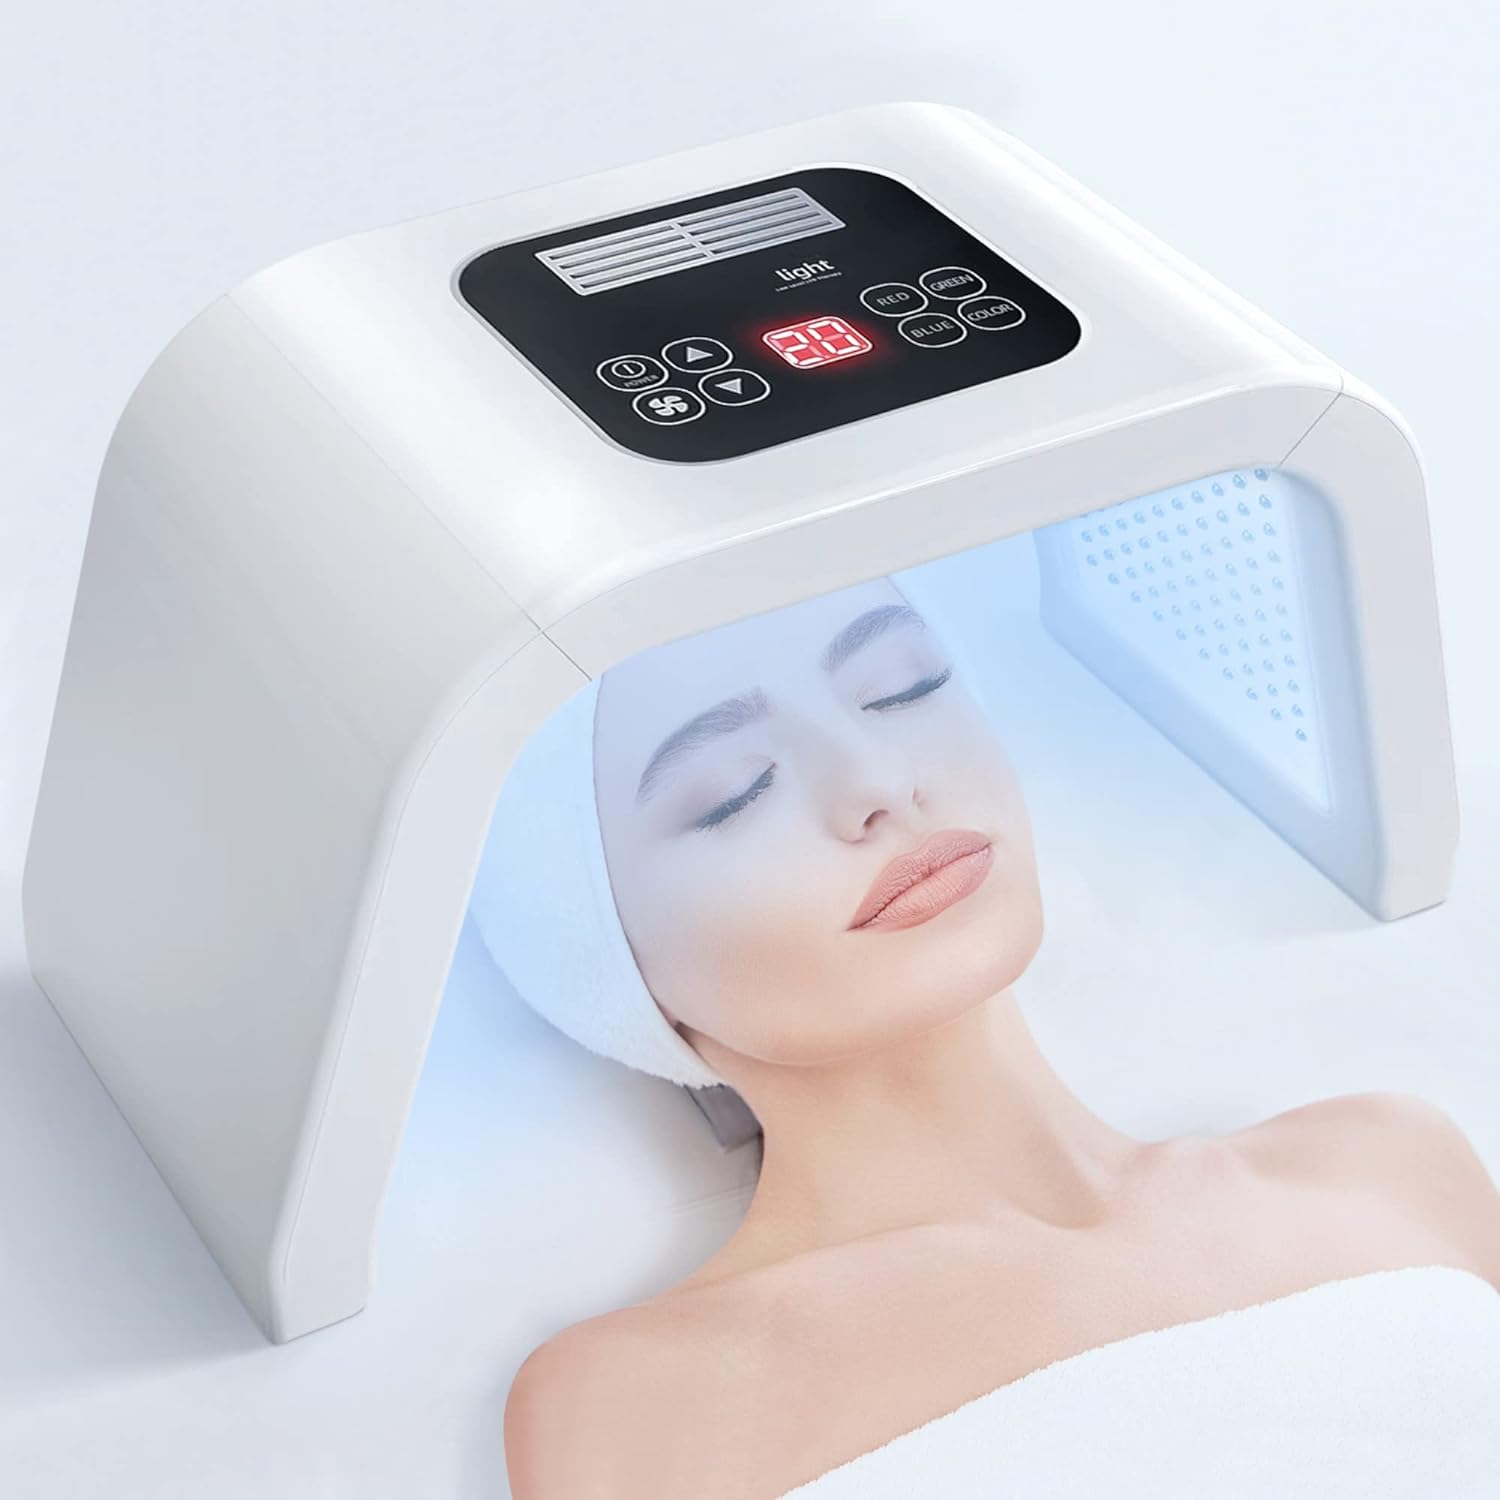 7-in-1 LED Light Therapy Facial Skincare Mask - Red Light Therapy for Face and Body